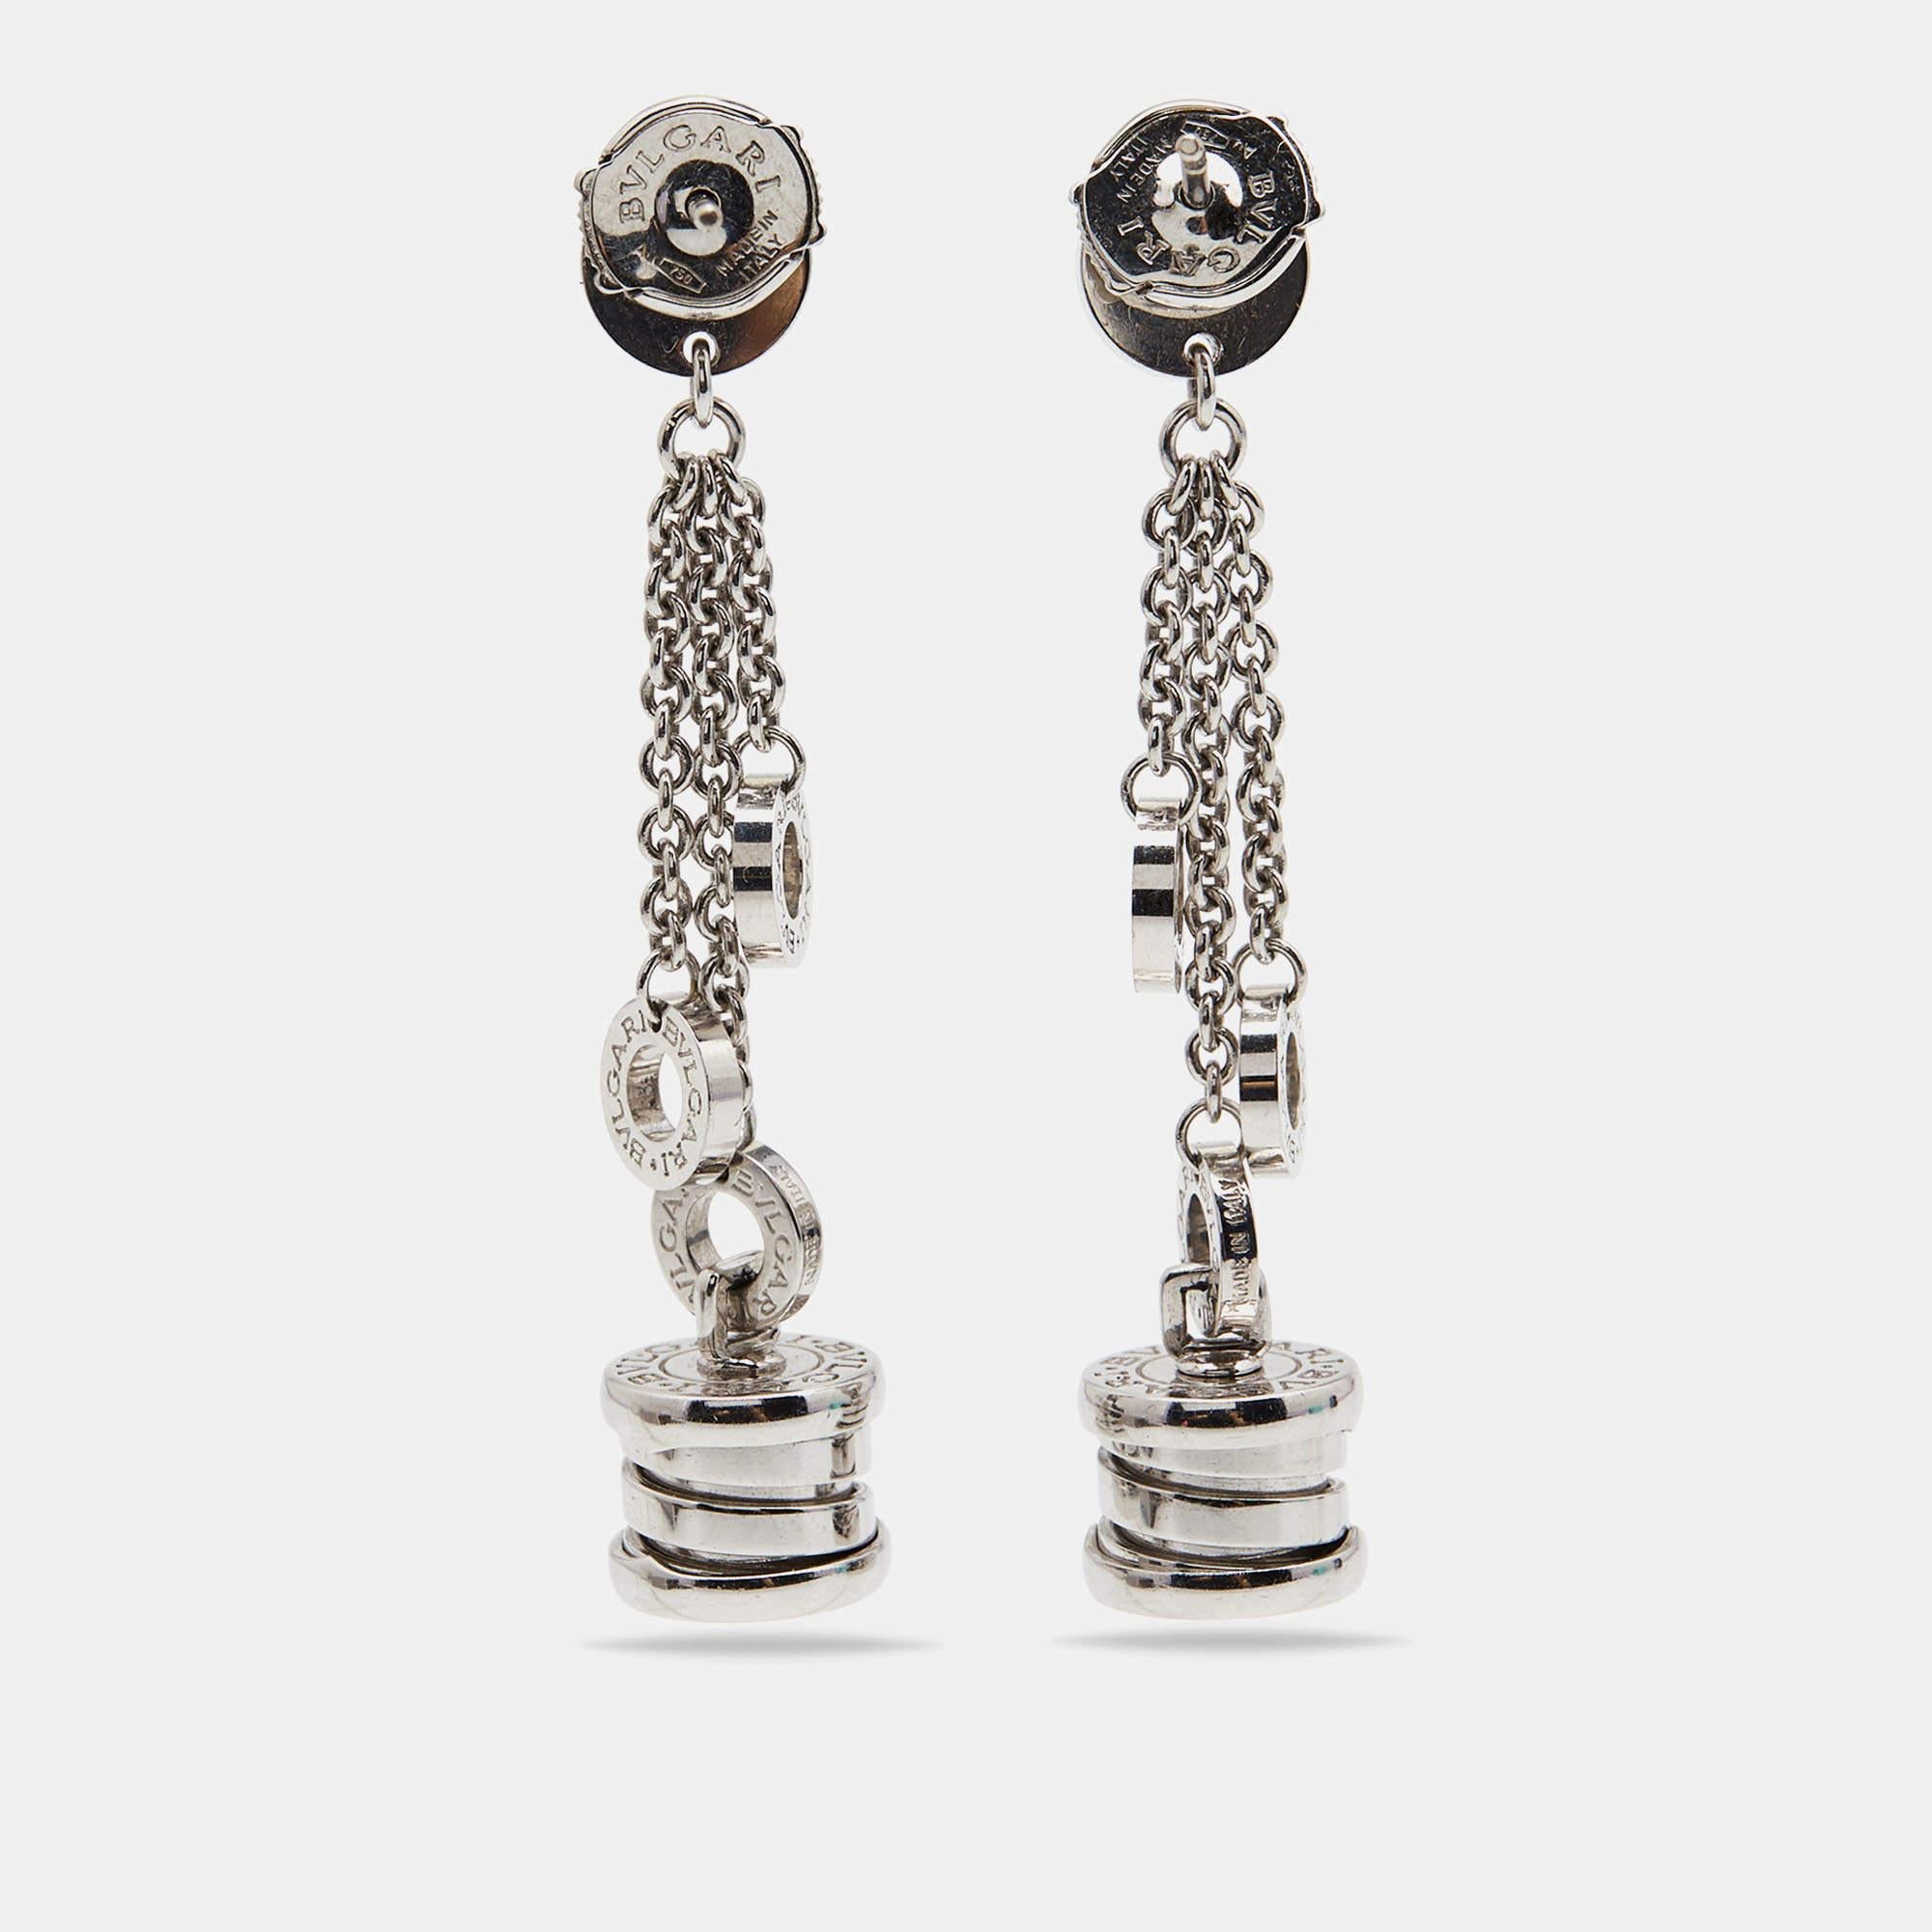 It is definitely Love at First Sight with this pair of Bvlgari earrings. Beautifully crafted from 18k white gold, the earrings are from the B.Zero1 collection. They have engraved rings, diamonds, and signature spiral motifs.

Includes
Authenticity